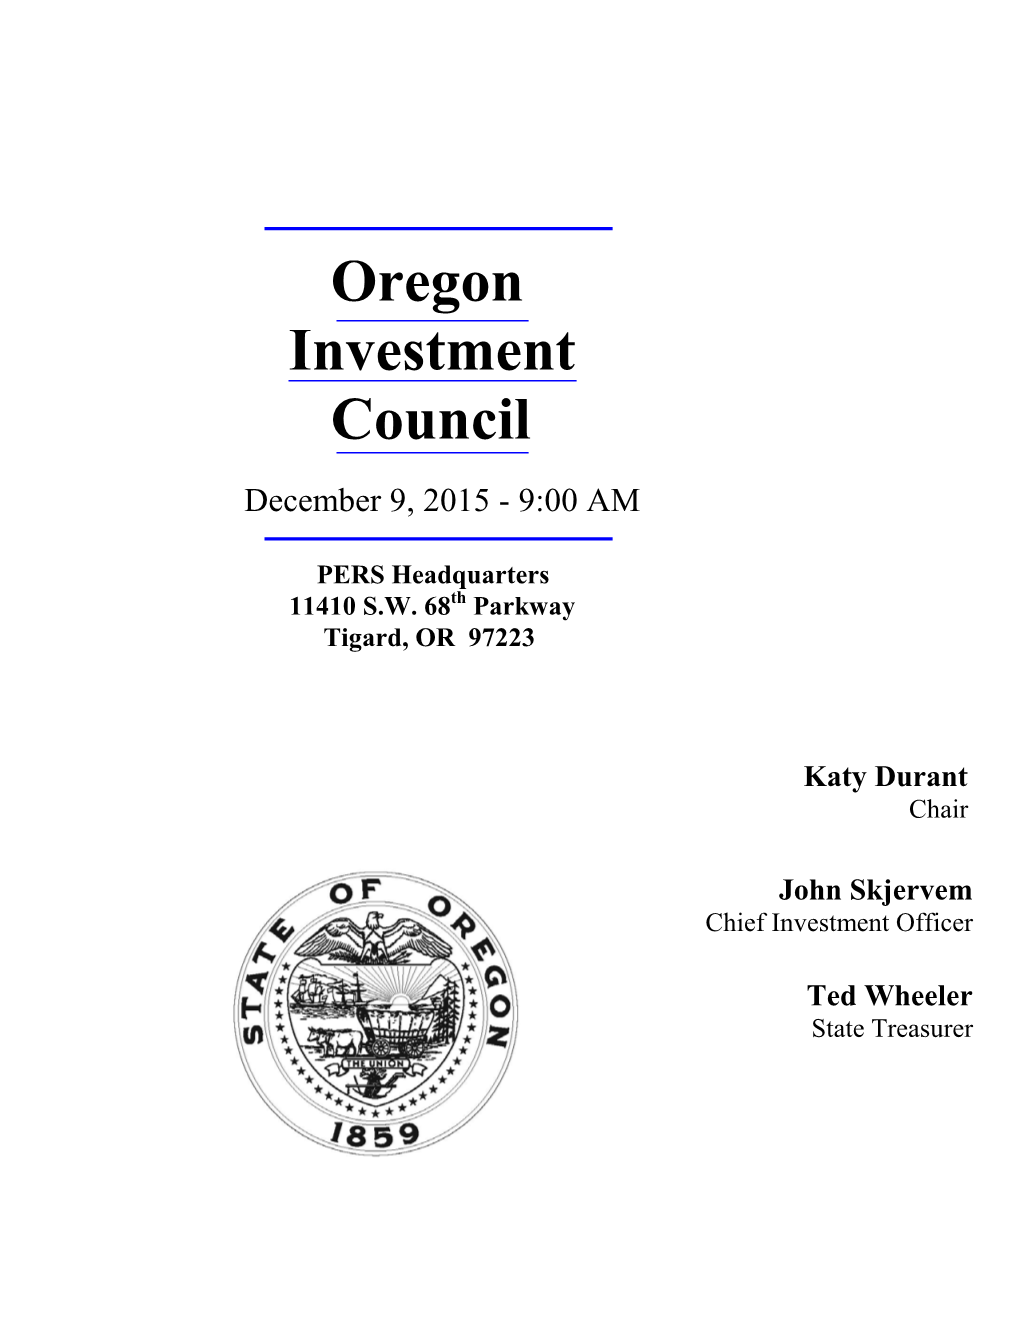 Oregon Investment Council (OIC)